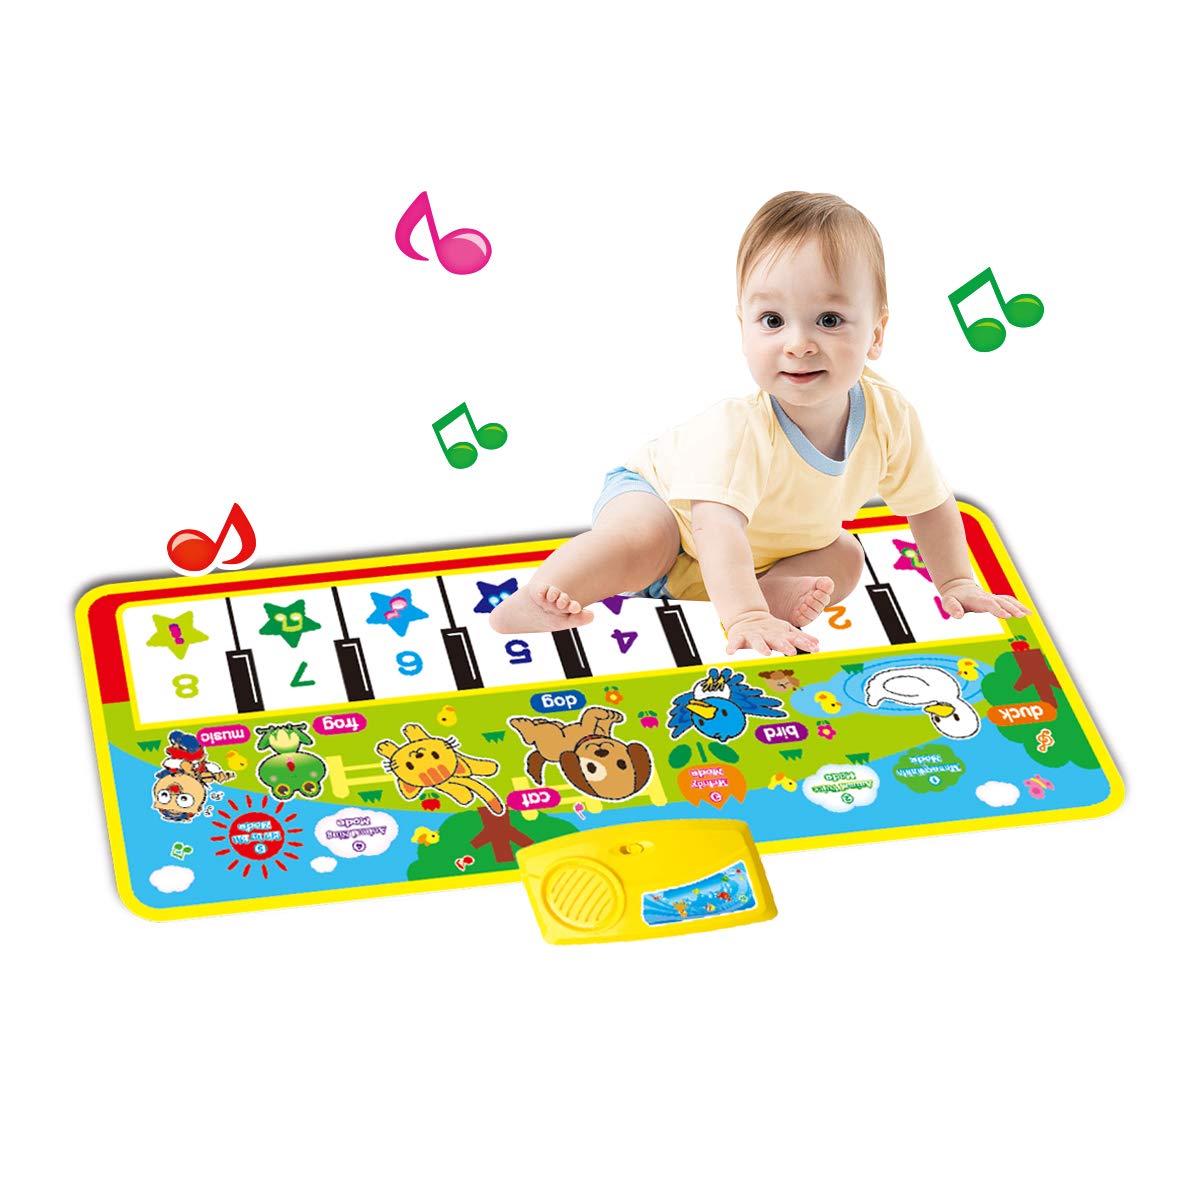 Baby Animal Sound and Music Floor Mat Musical Entertainment Center | Baby and Toddler Floor Piano Packaged in Colored Box | Great Baby Gift Idea